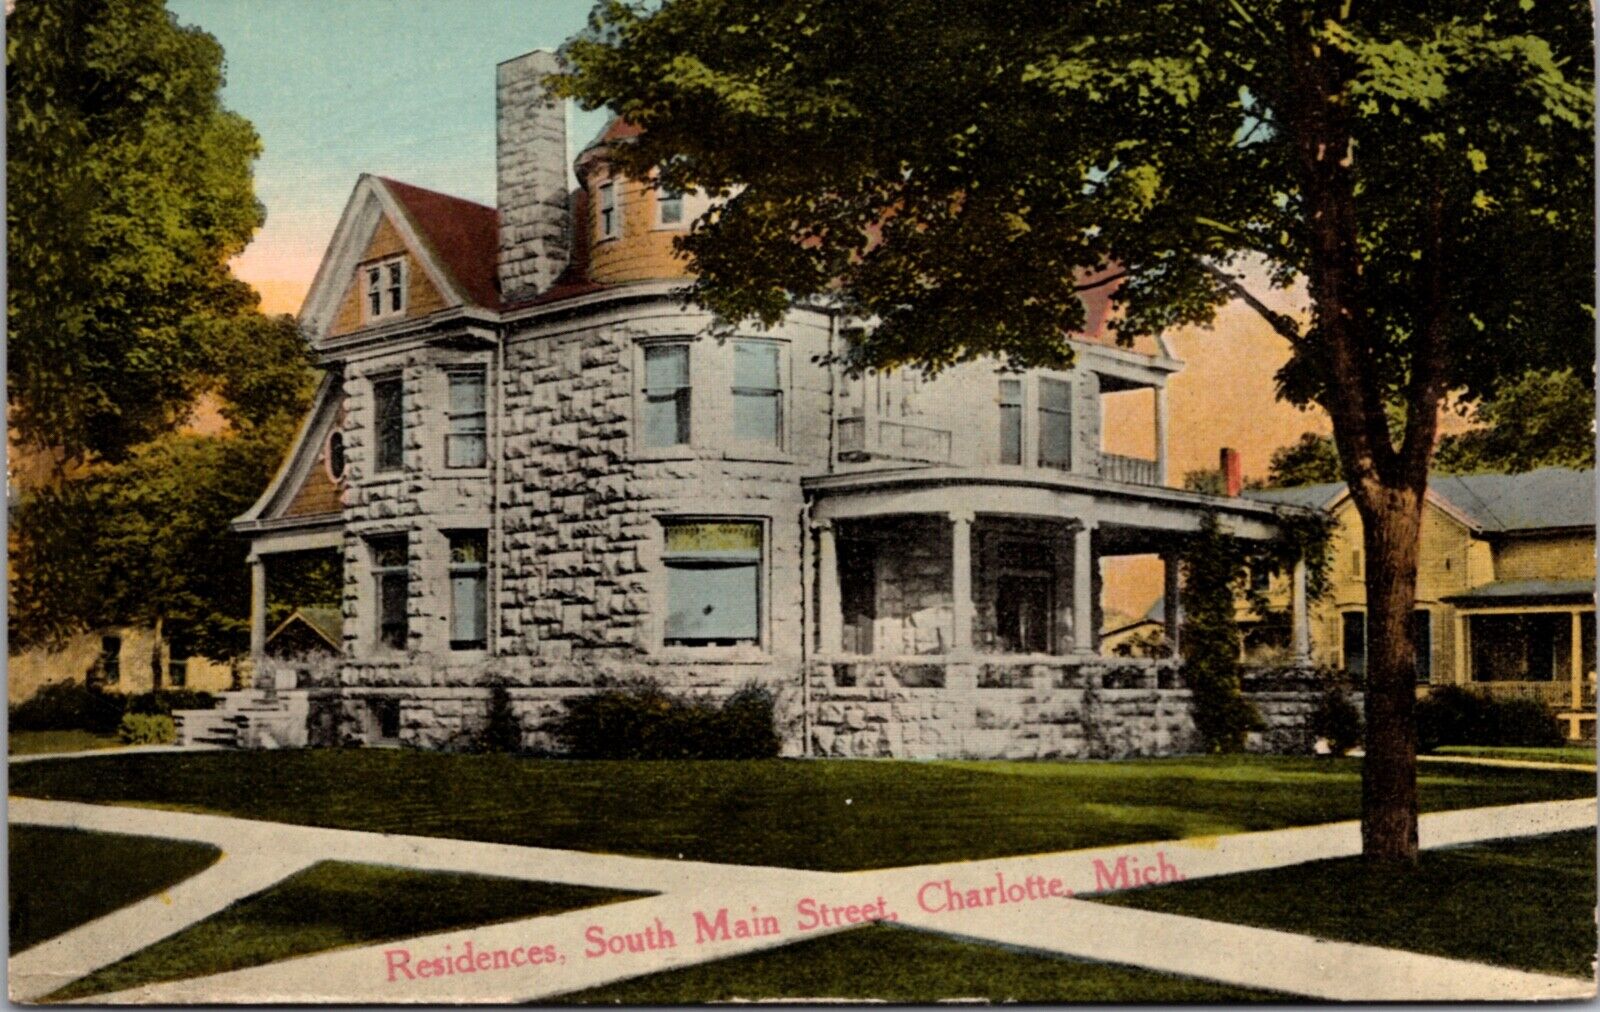 Postcard Residences on South Main Street in Charlotte, Michigan